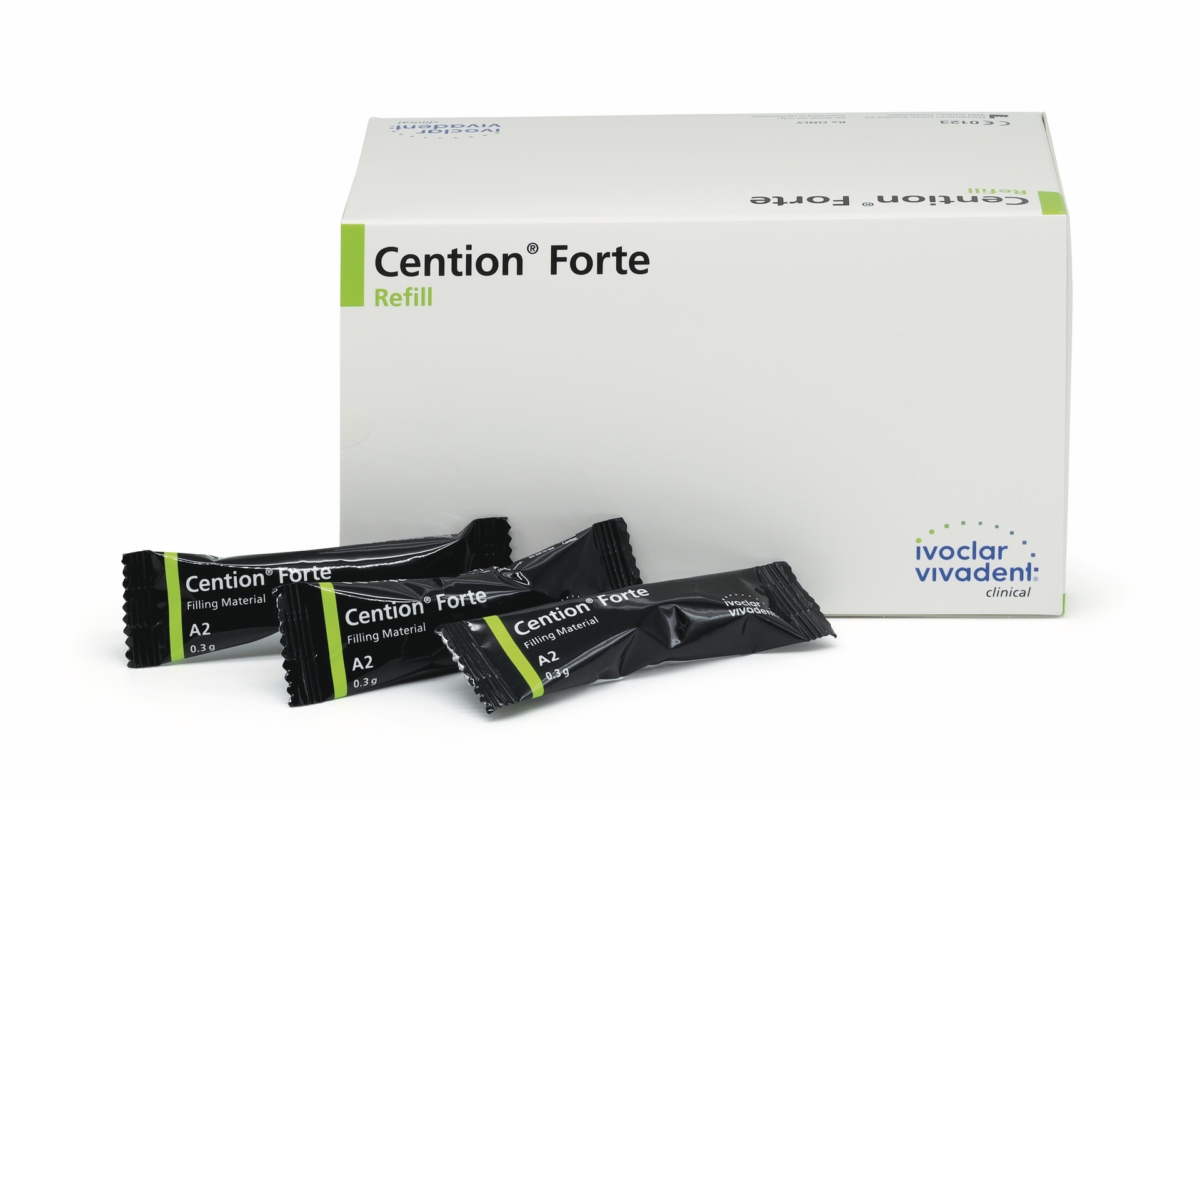 CENTION FORTE REFILL CAPSULE 50PZ A2